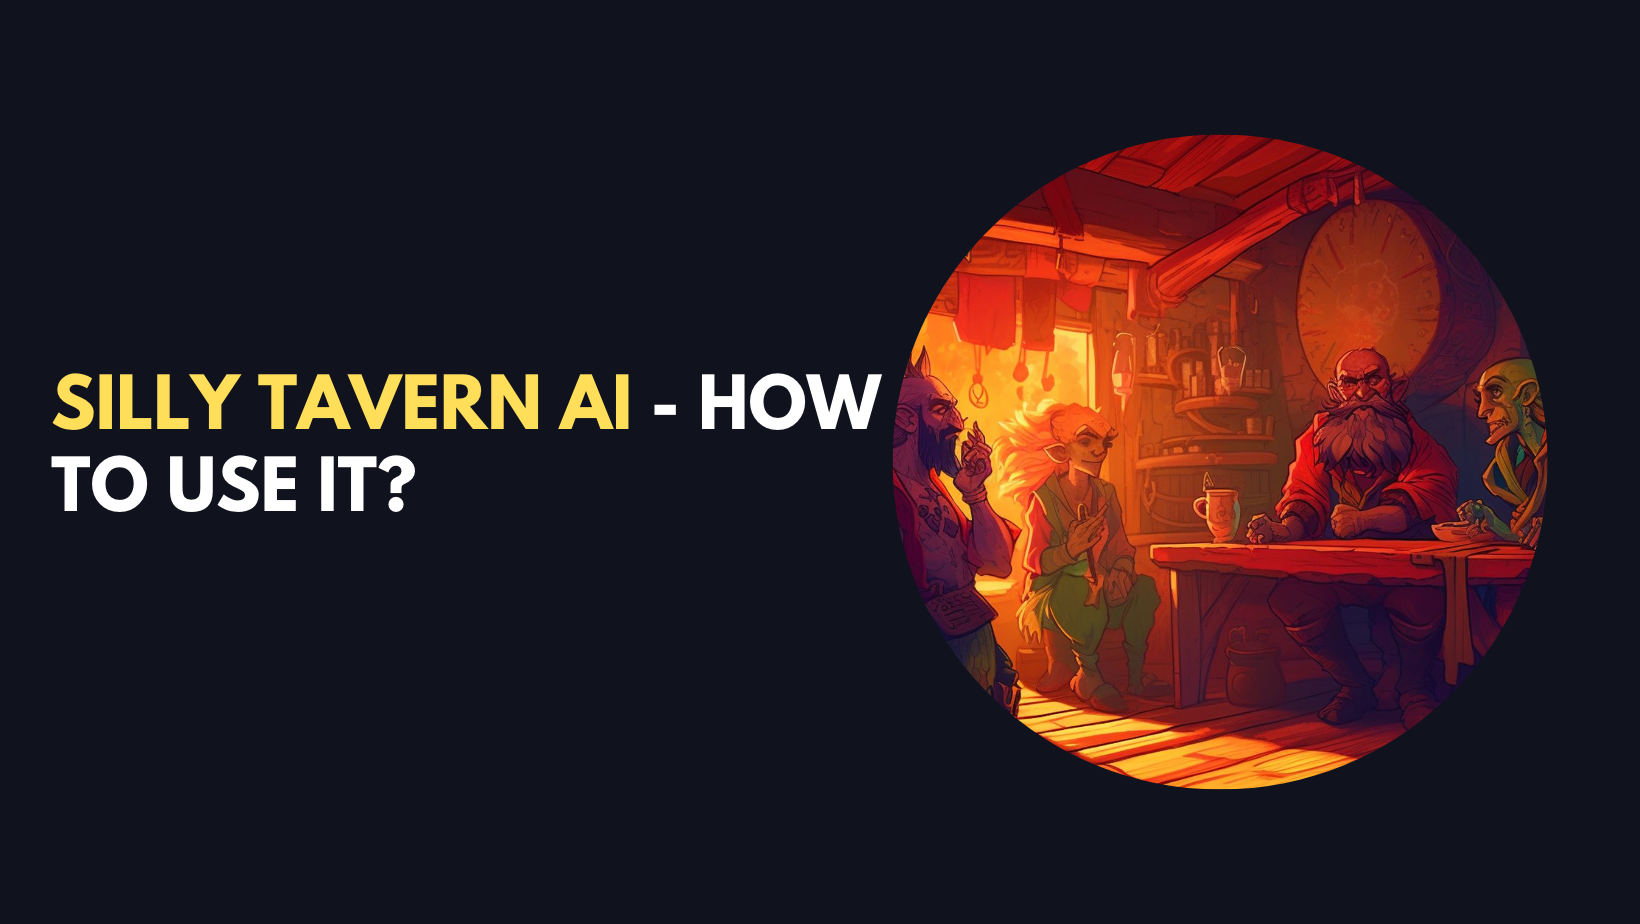 Silly Tavern AI - How To Install And Use It?